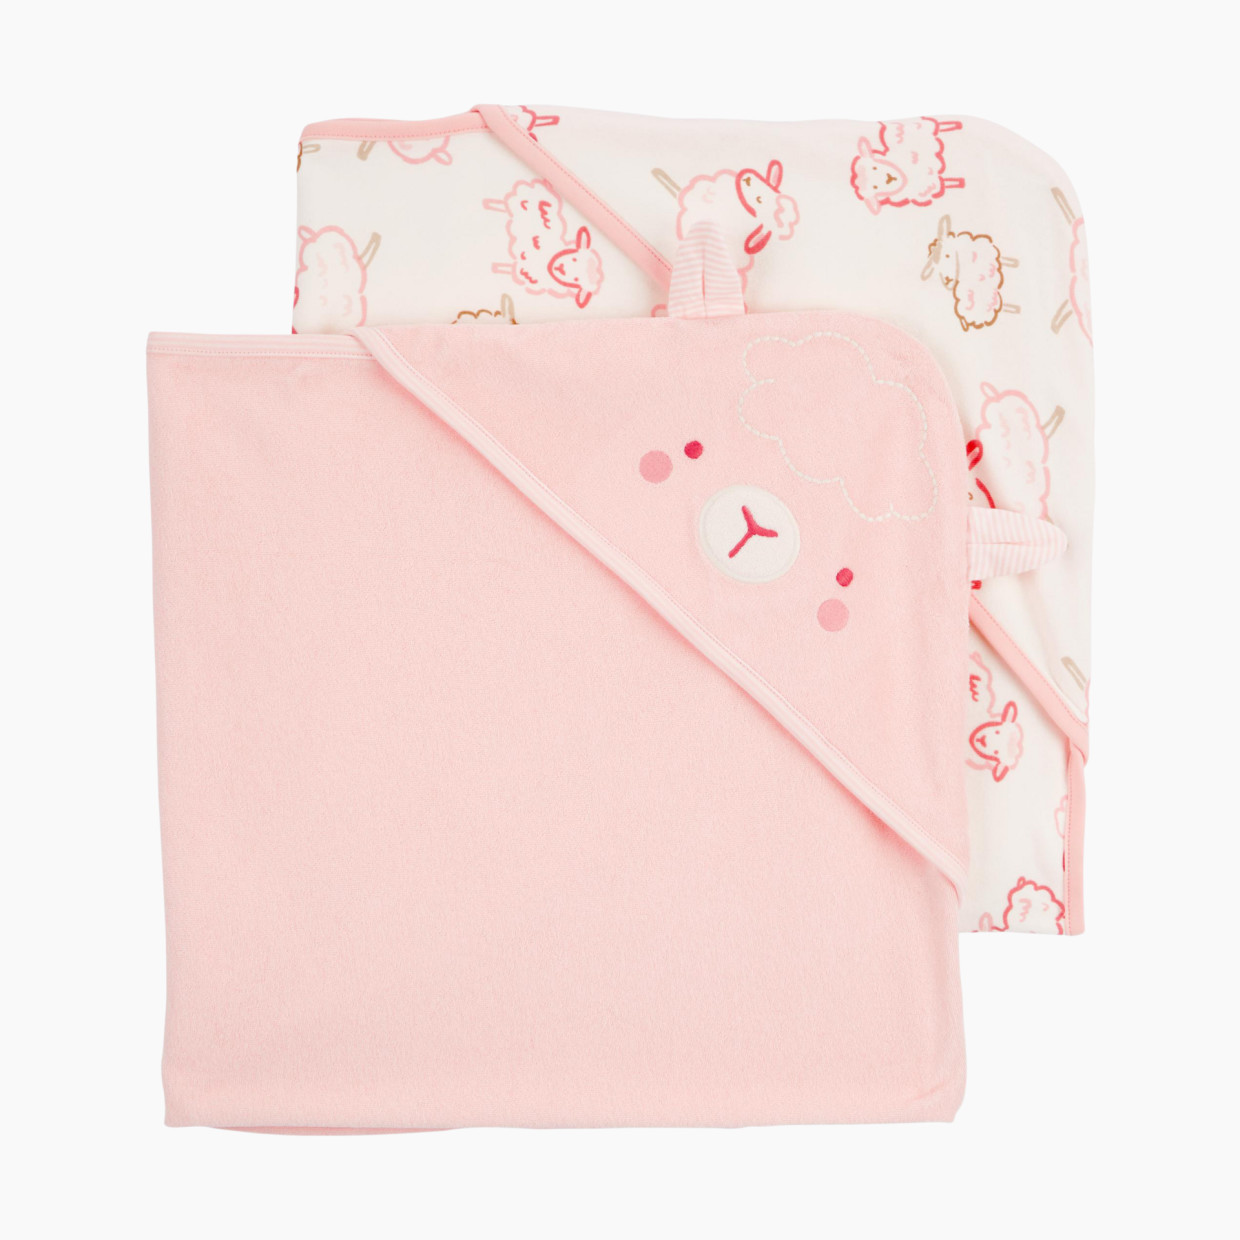 Carter's Hooded Towel (2 Pack) - Pink/Ivory, O/S.